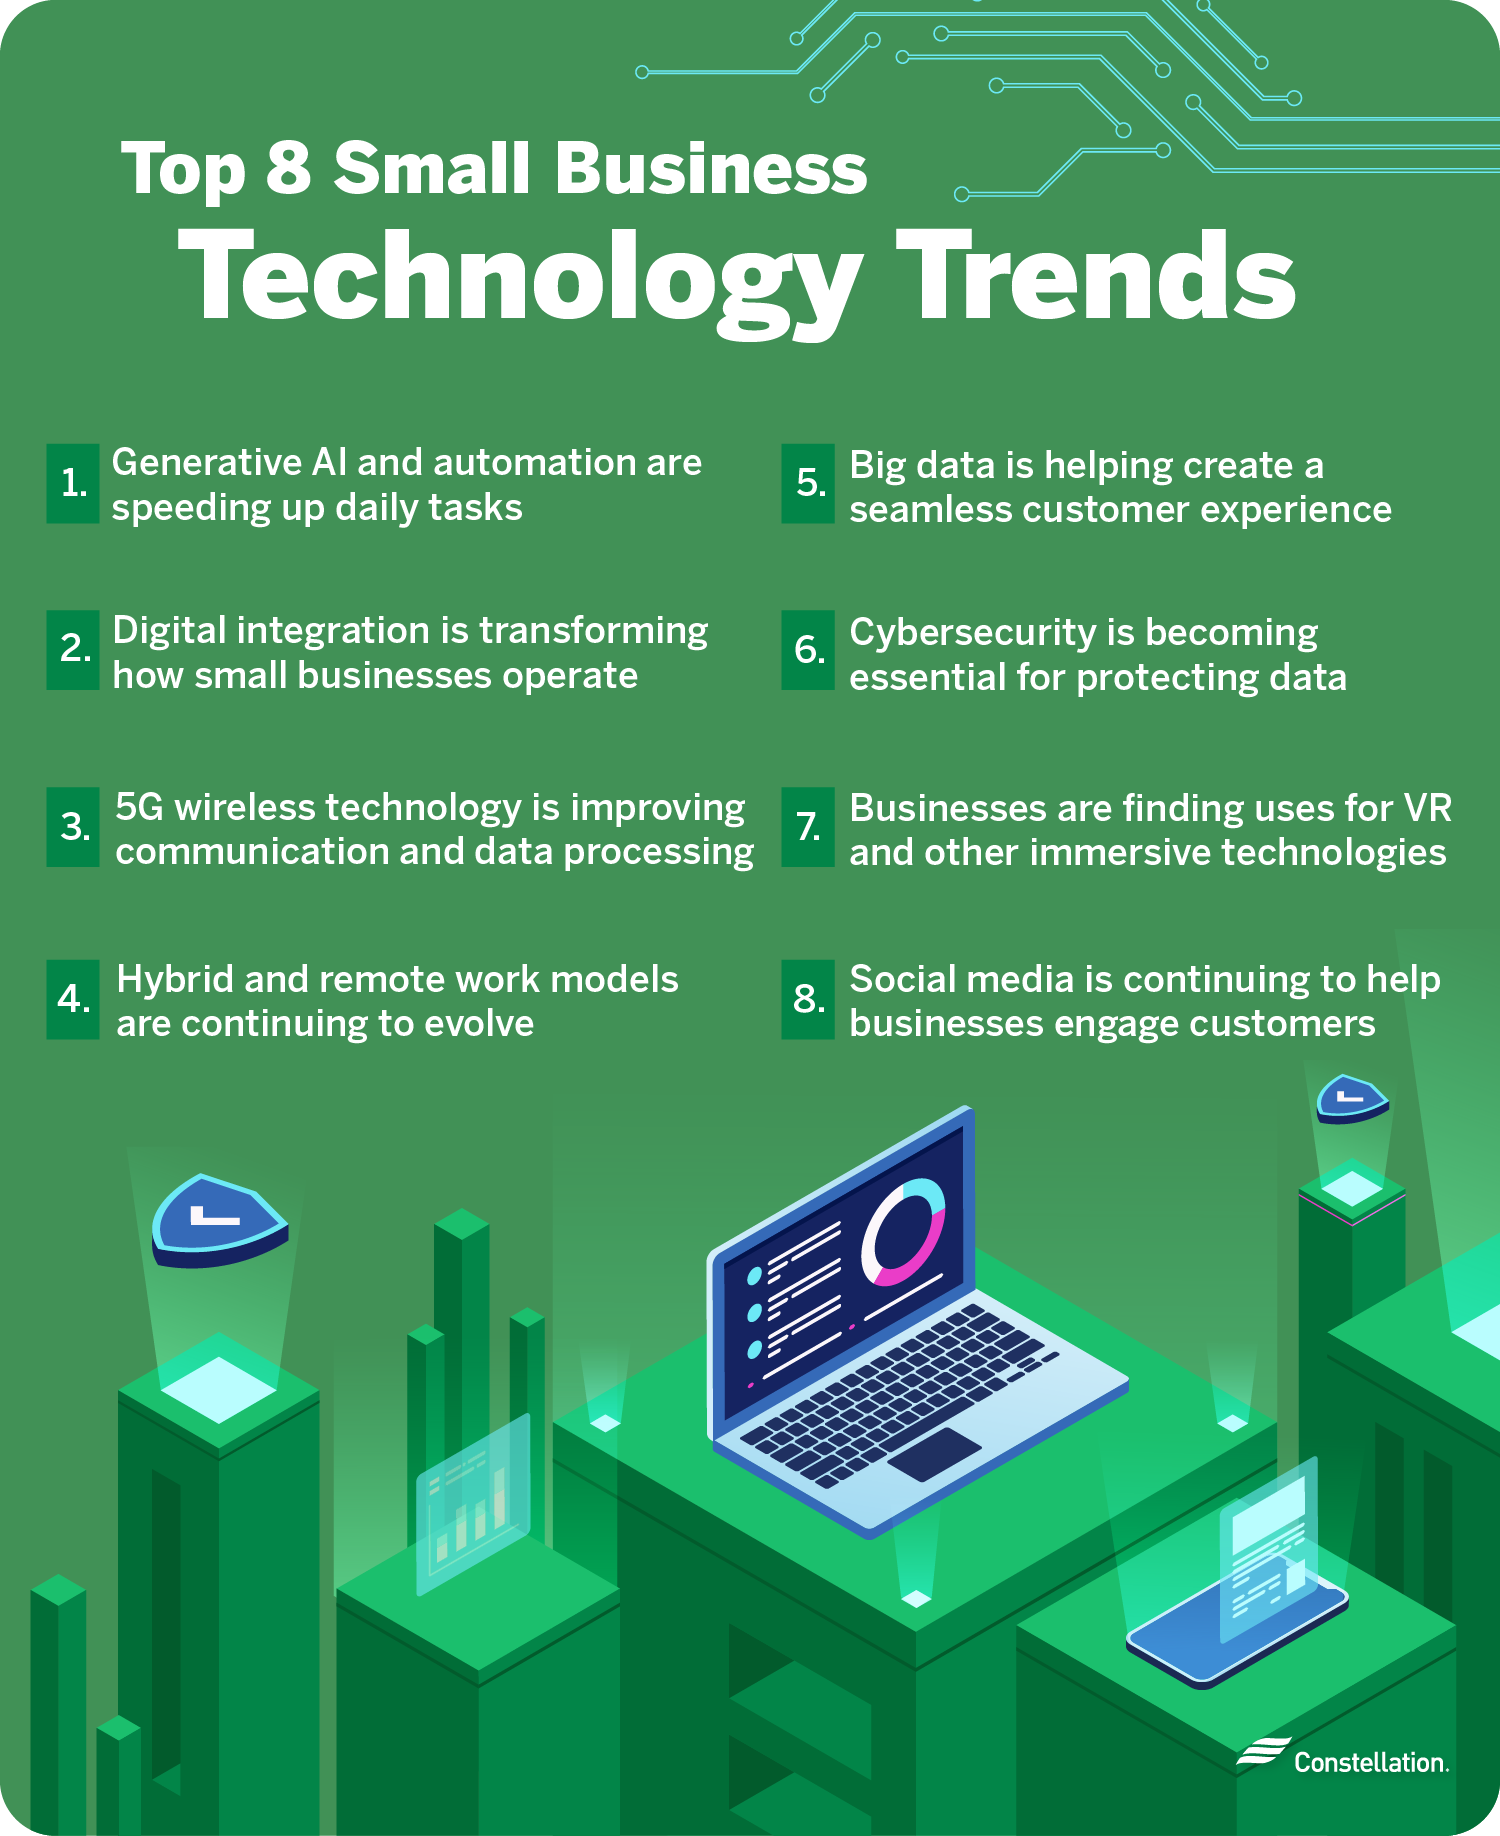 Top 8 small business technology trends.